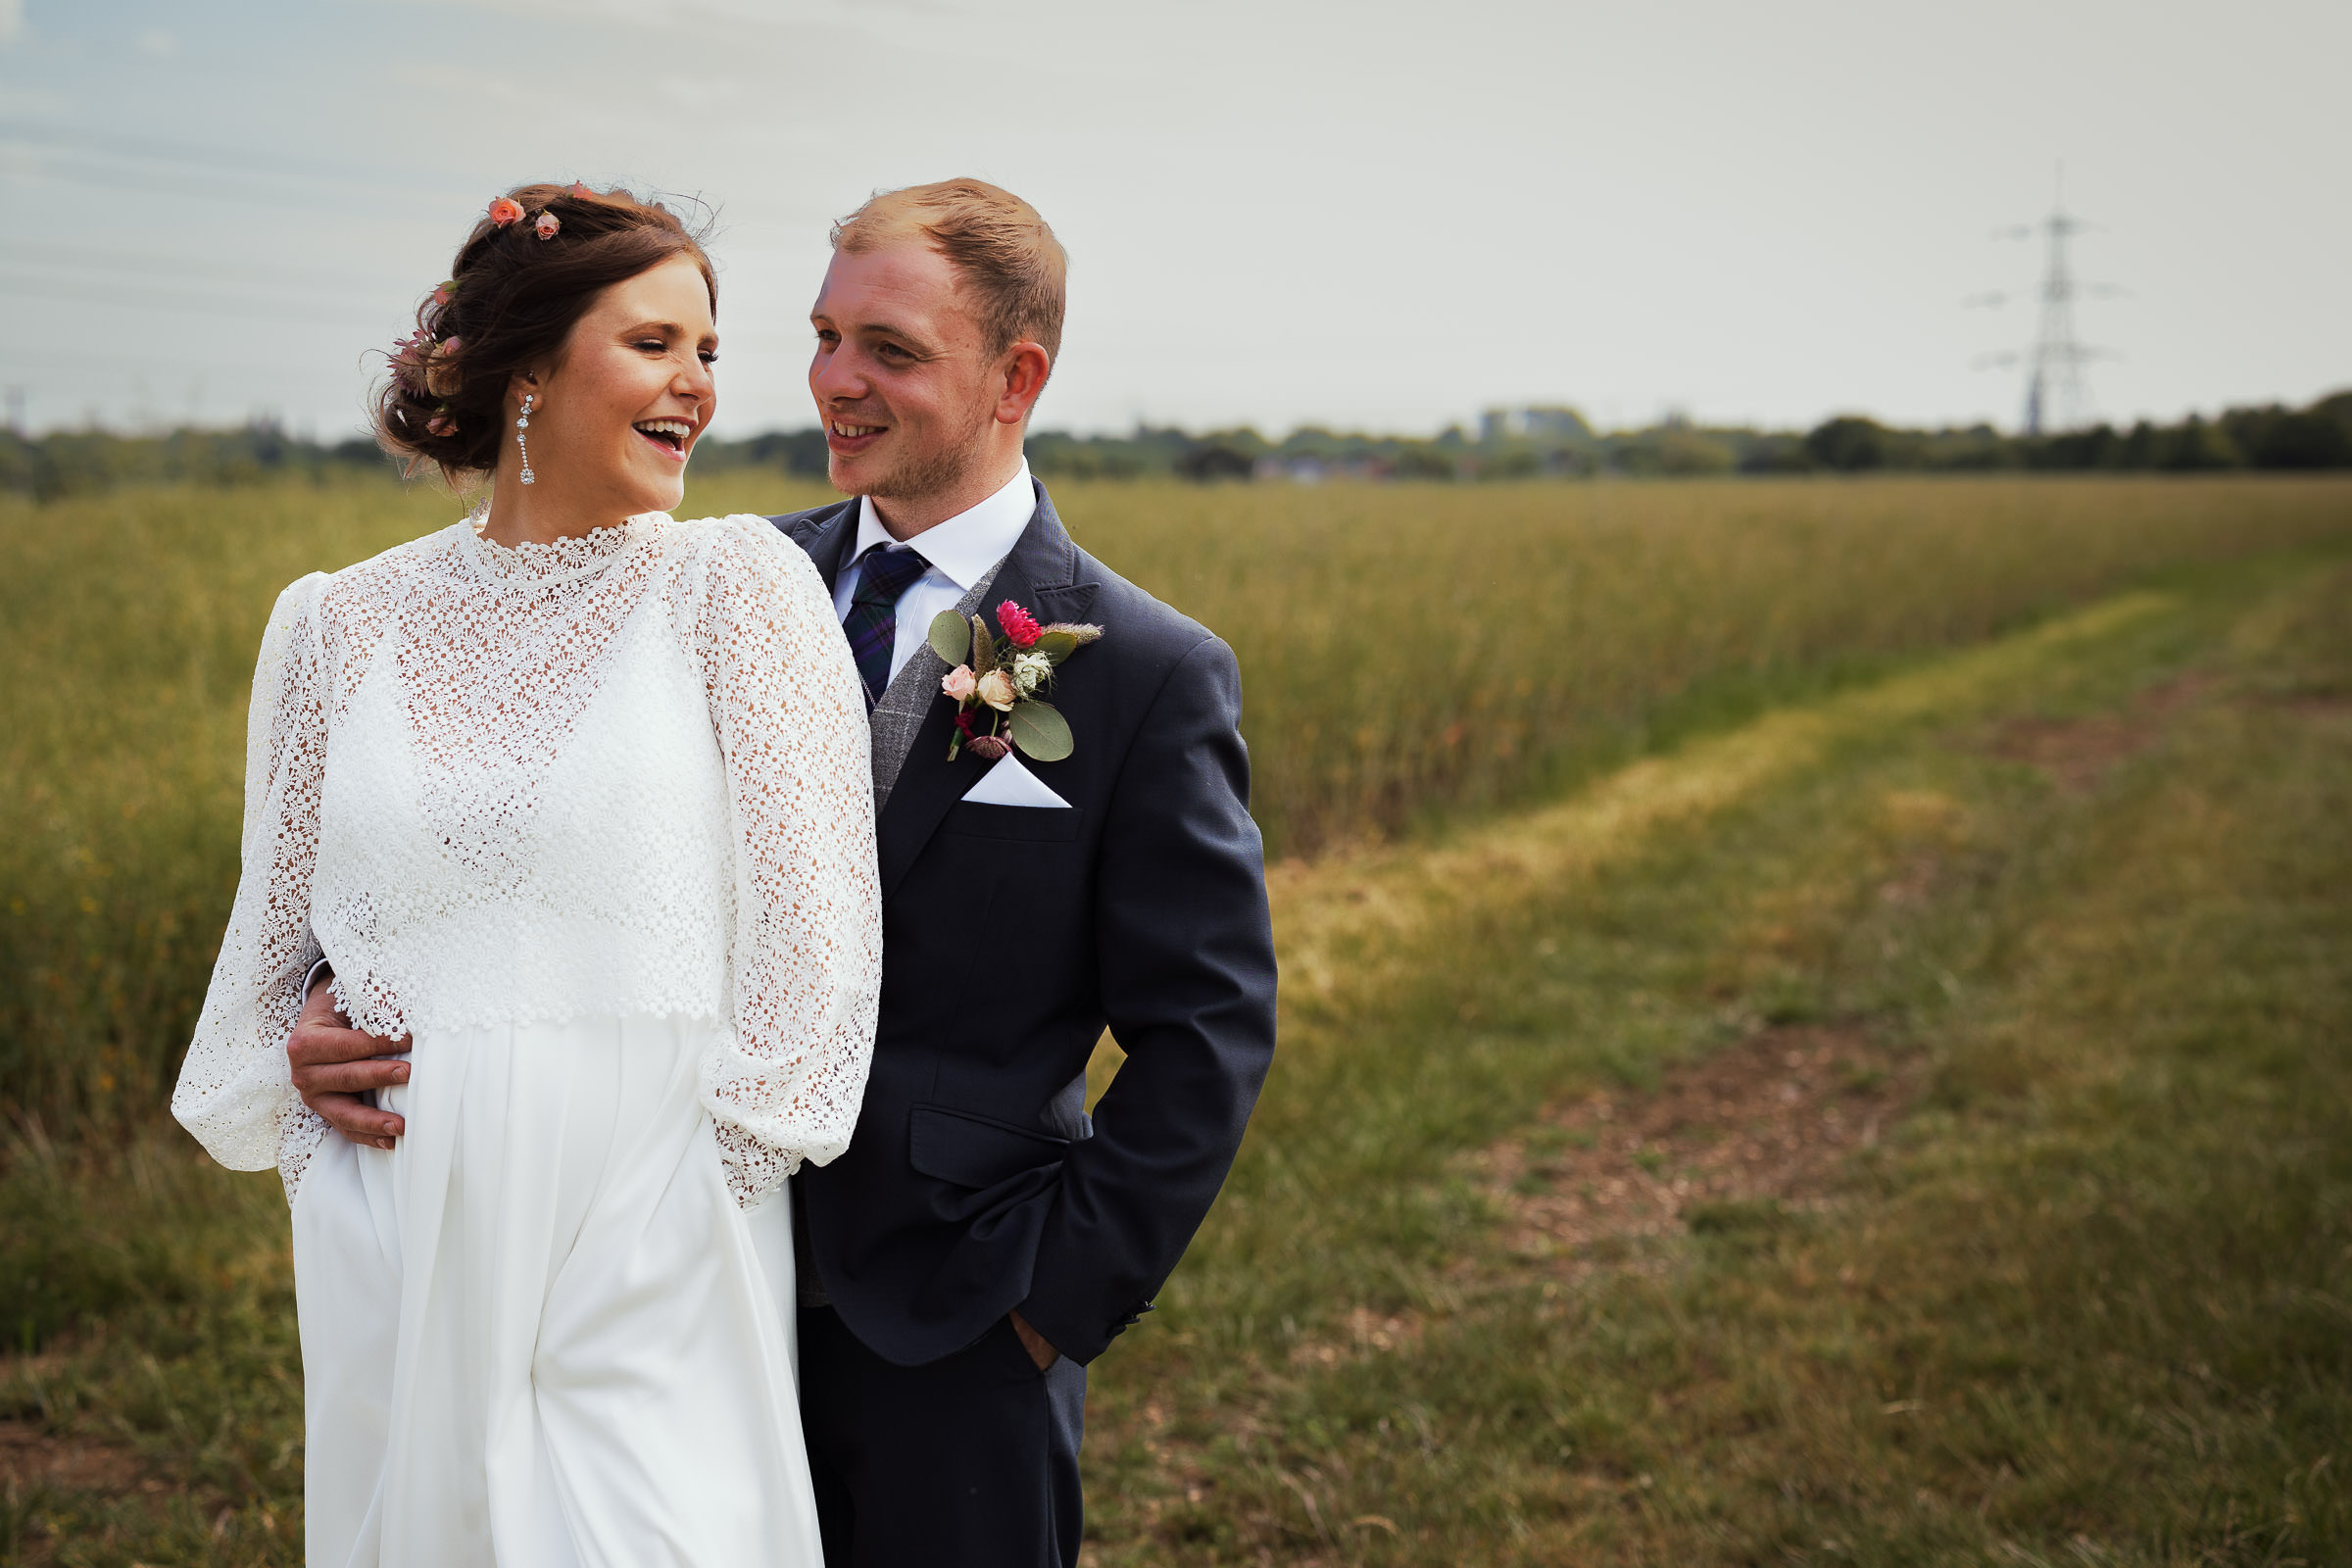 A newly married couple standing in a field in Essex and smiling. The bride is pregnant and her husband hugs her.